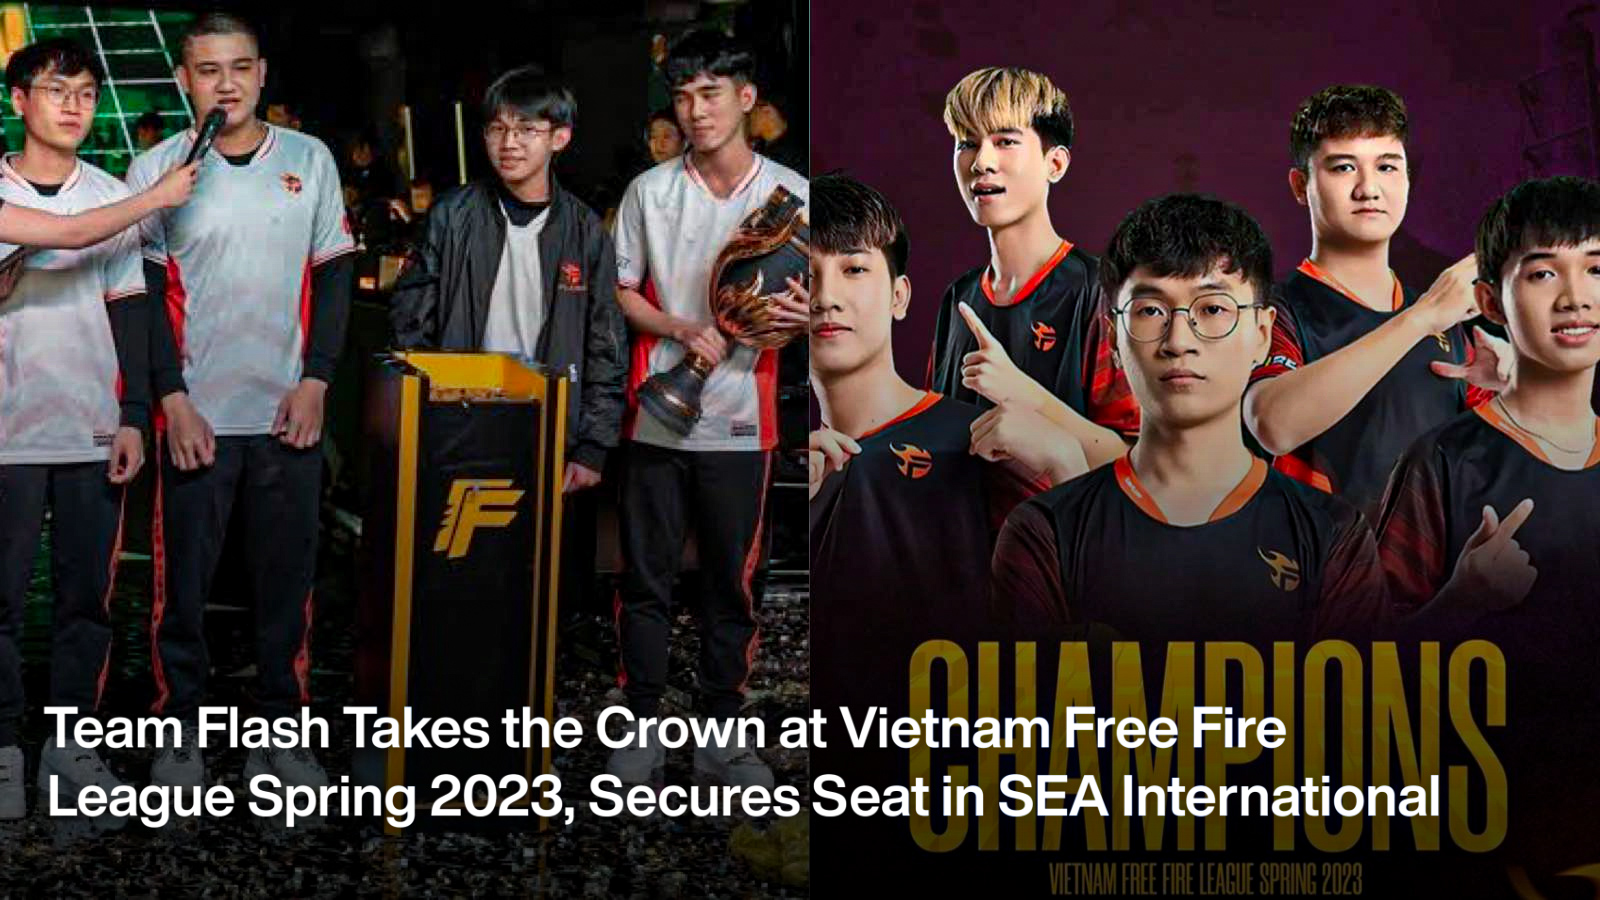 Team Flash Takes the Crown at Vietnam Free Fire League Spring 2023, Secures Seat in SEA International